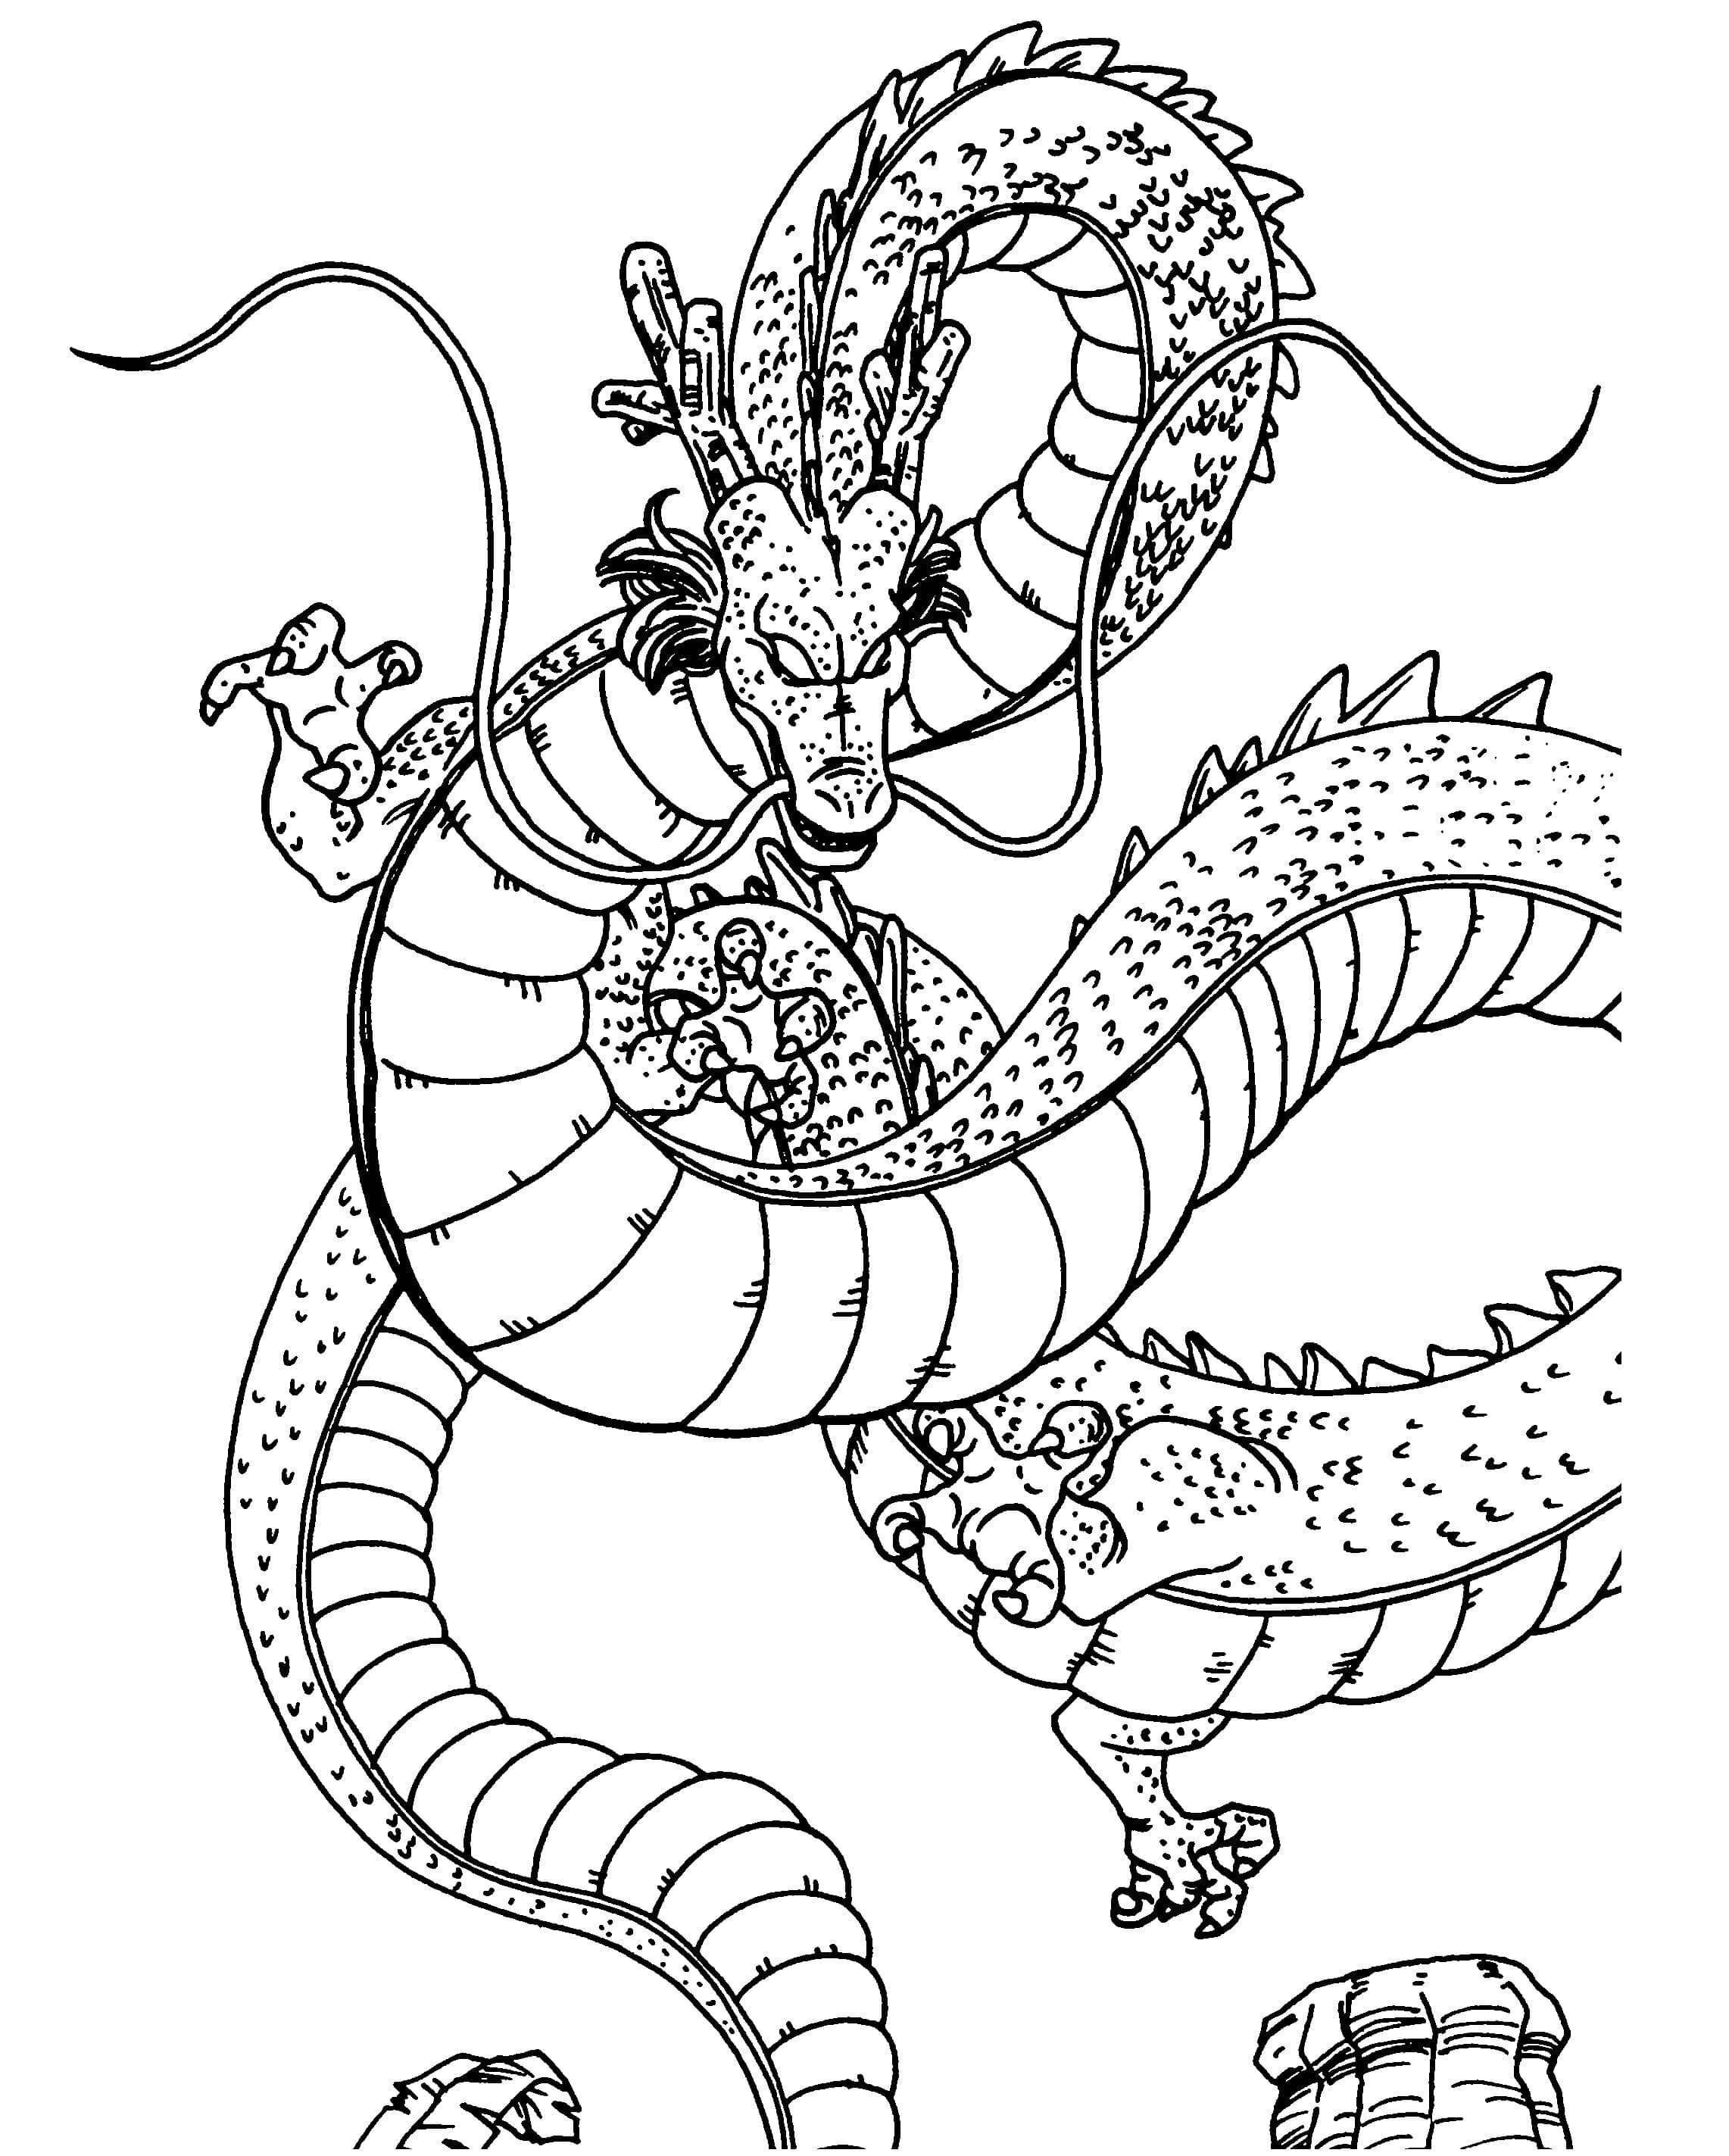 Make A Wish To The Dragon Coloring Pages